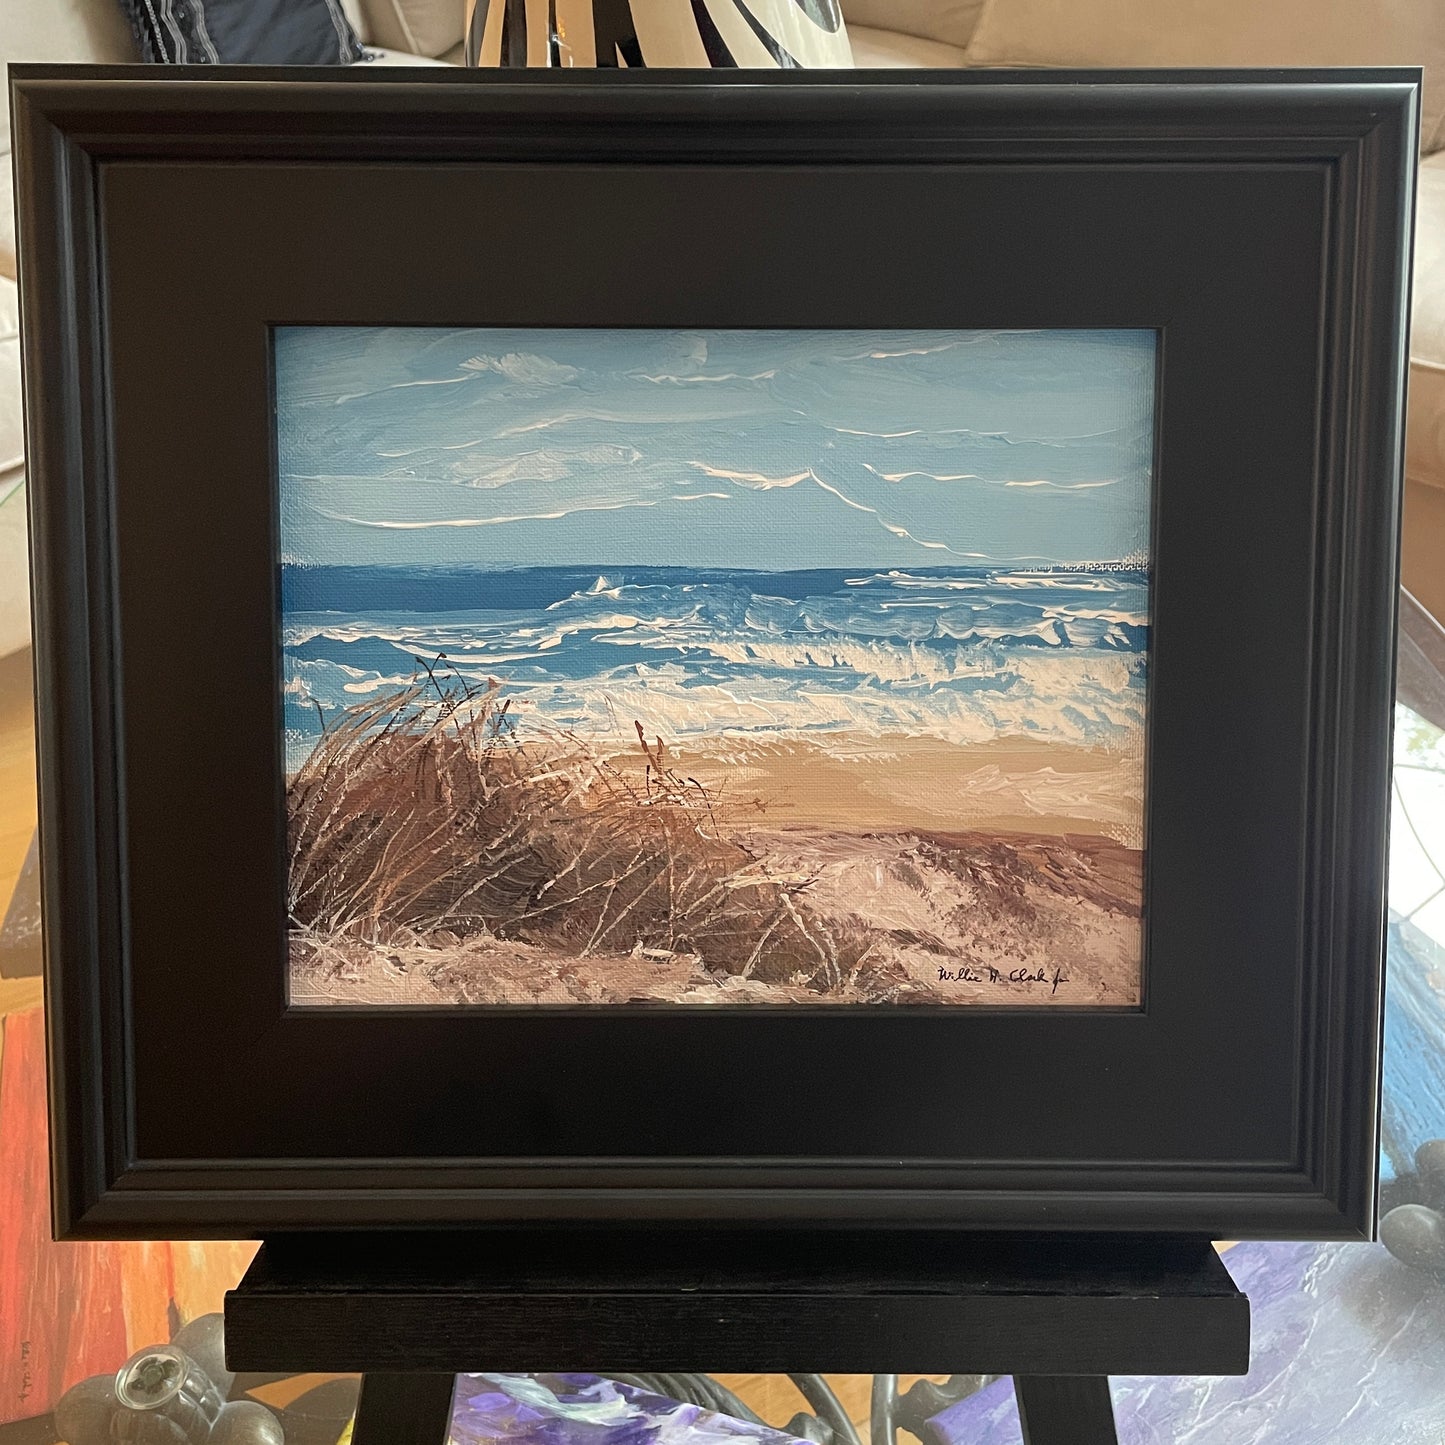 Seagrass on the Beach Ocean Original Painting by a South Carolina Artists